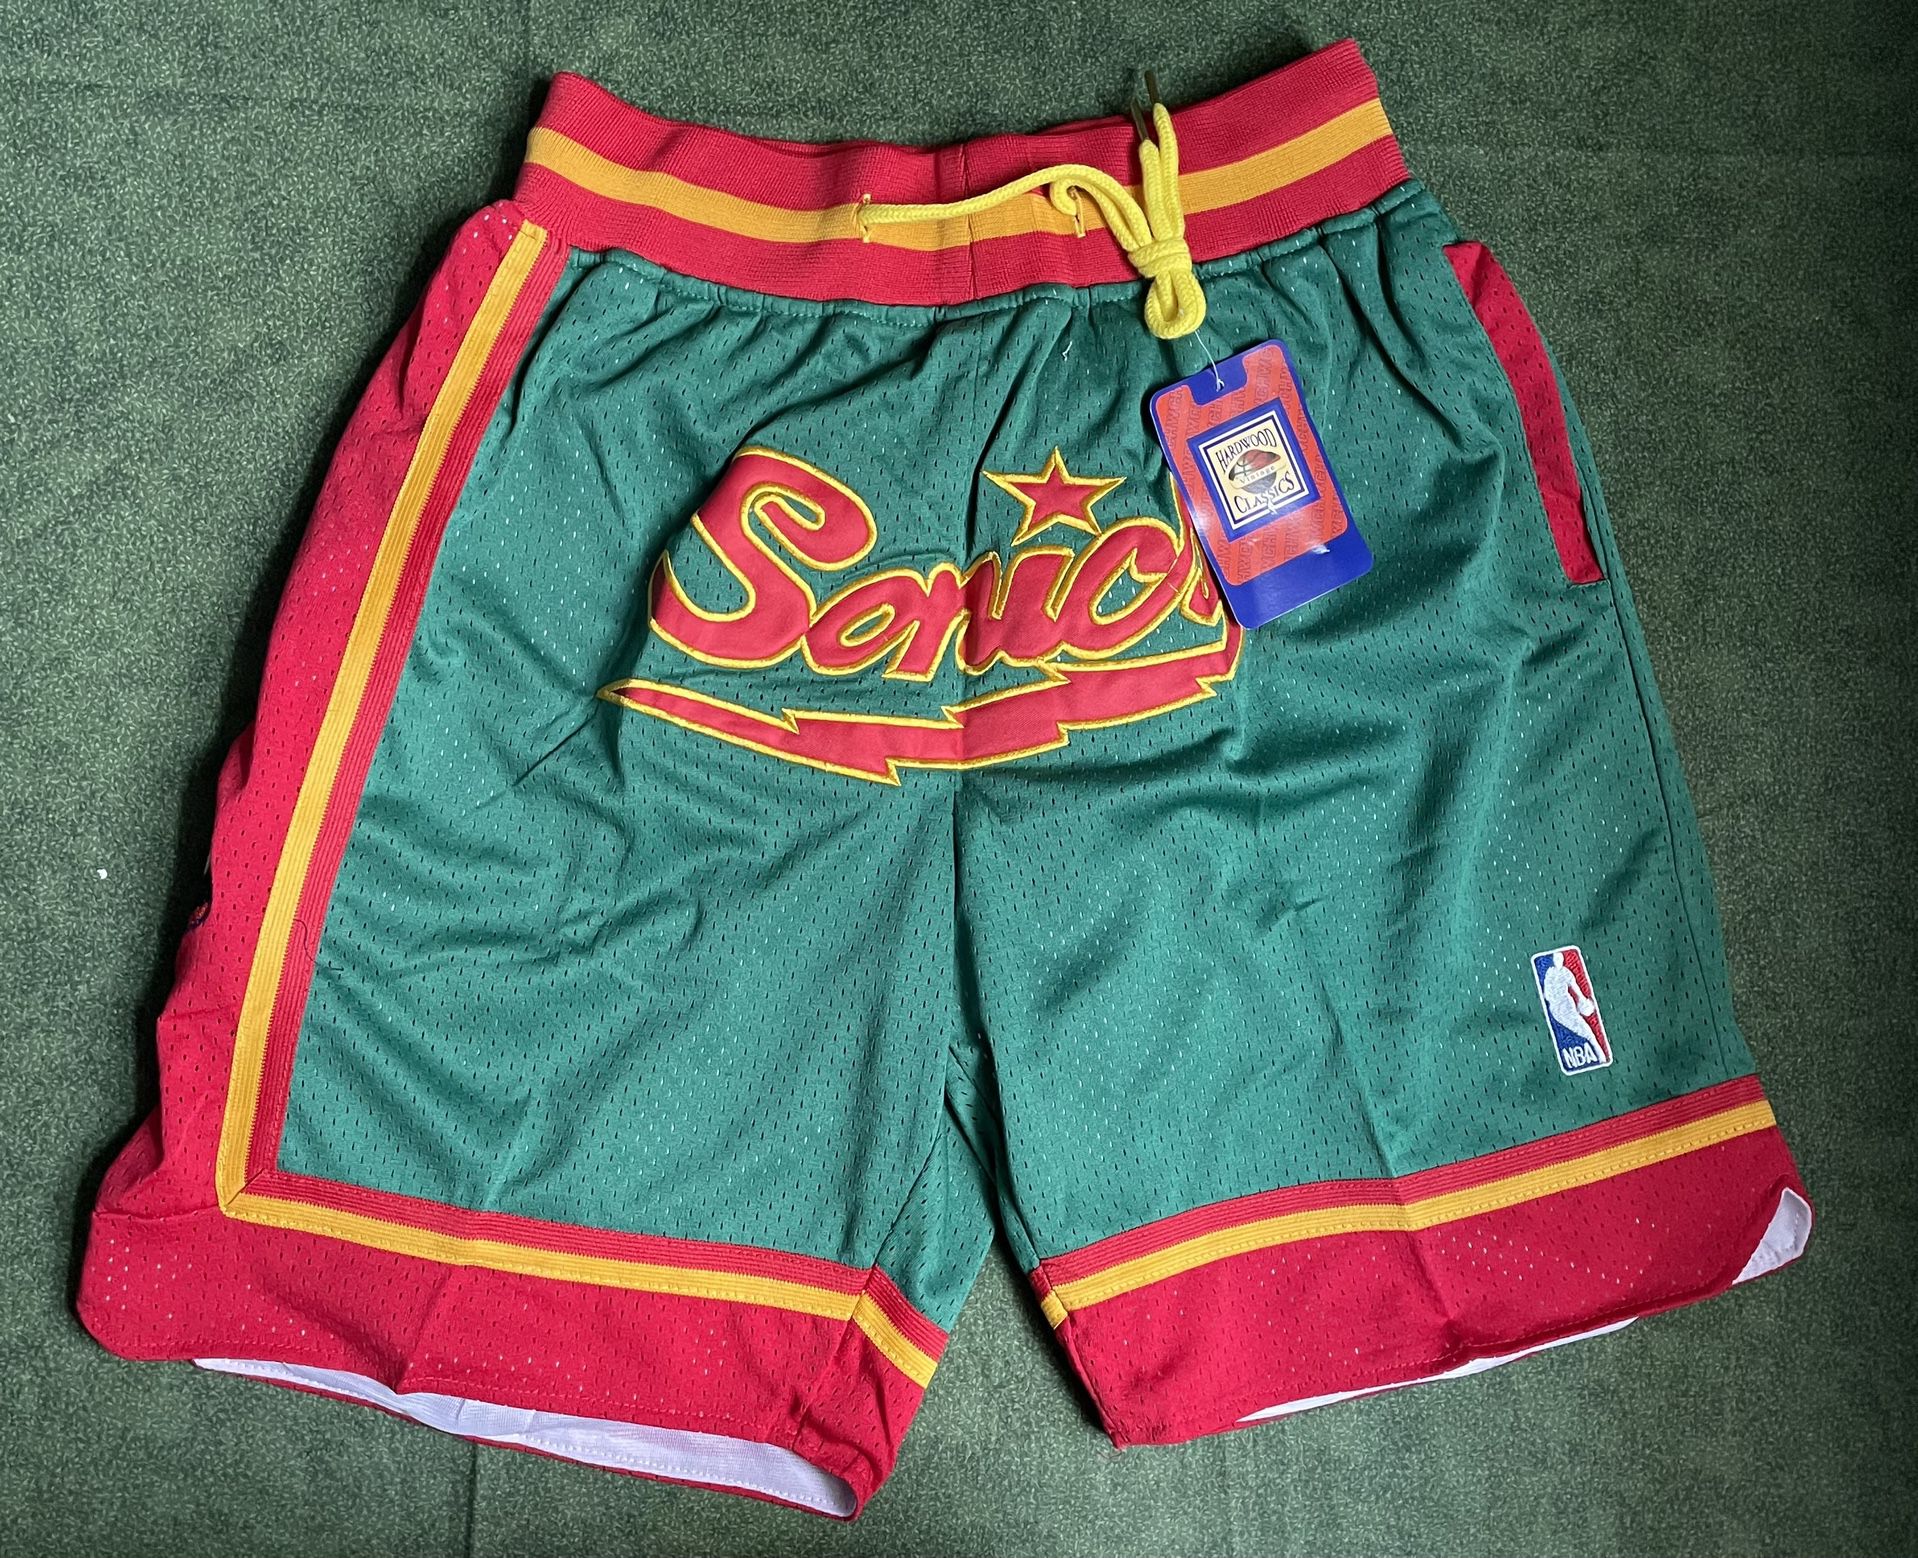 SEATTLE SUPERSONICS JUST DON NBA BASKETBALL SHORTS BRAND NEW WITH TAGS SIZES SMALL, MEDIUM AND LARGE AVAILABLE